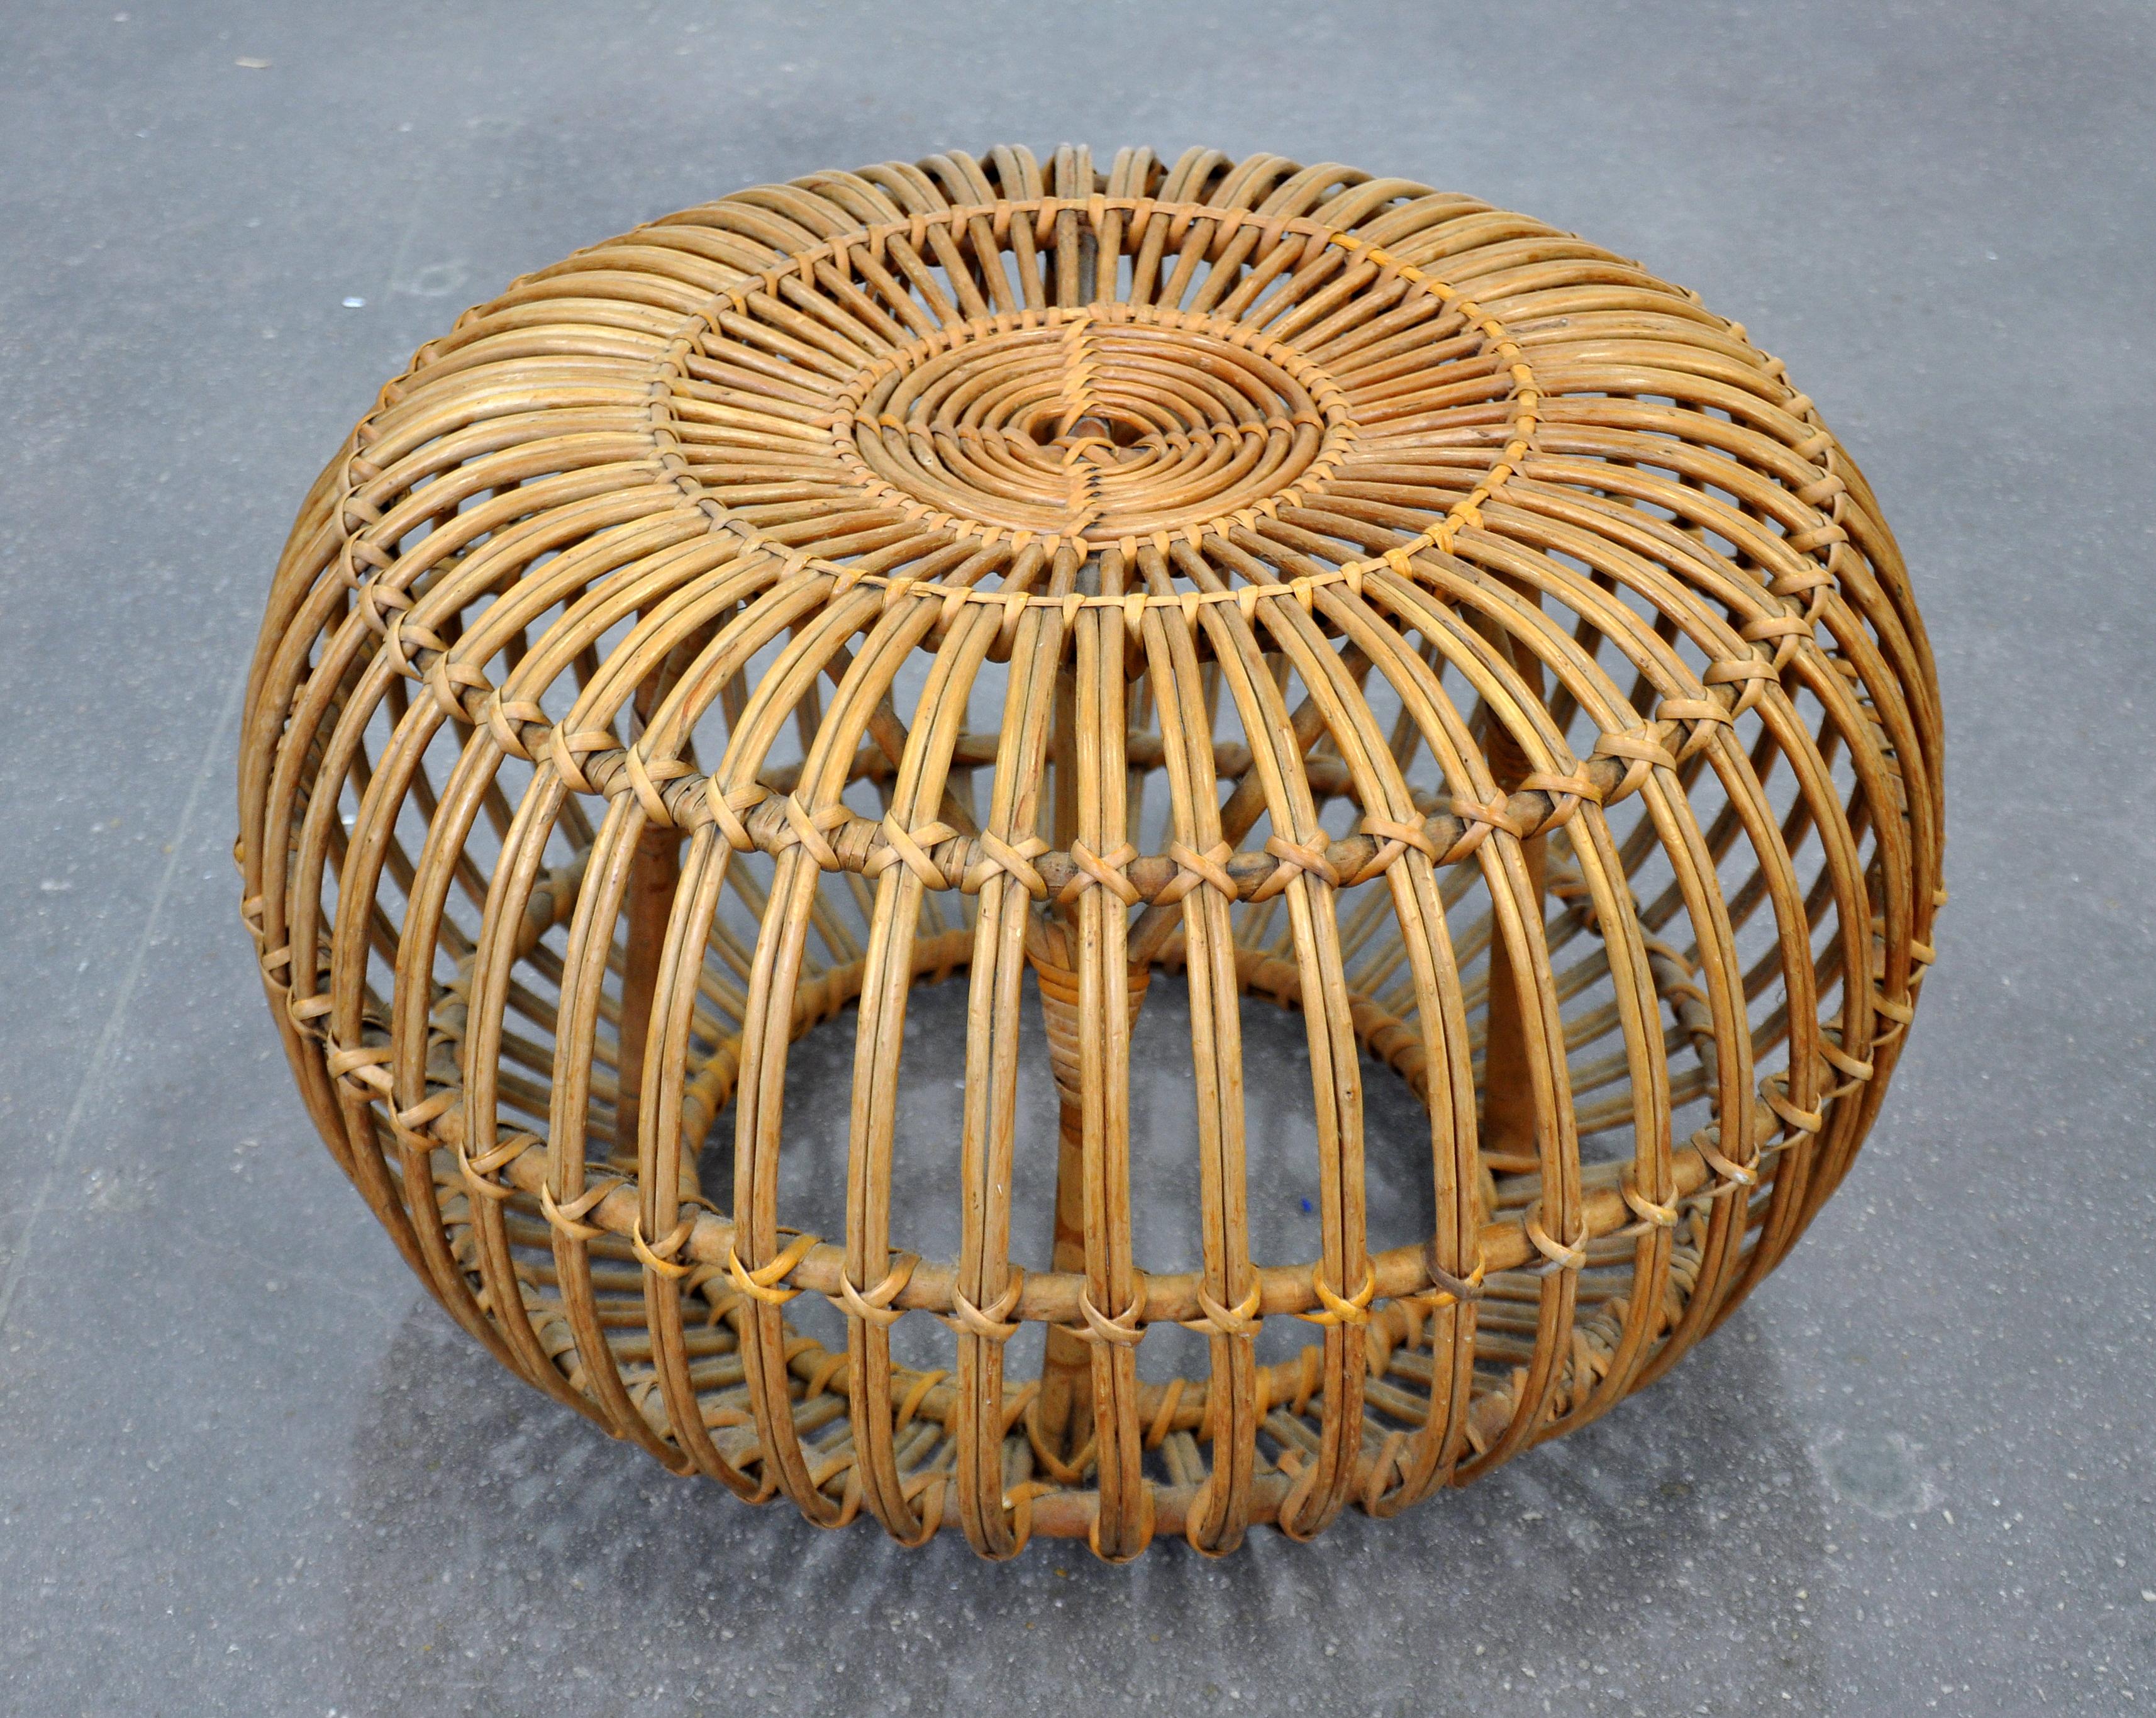 A vintage Mid-Century Modern circular pouf designed by Franco Albini in the 1950s and manufactured by Vittorio Bonacina in the 1960s. An ingeniously designed stool that's composed solely of bent-rattan weaving makes for a Classic and stylish piece.